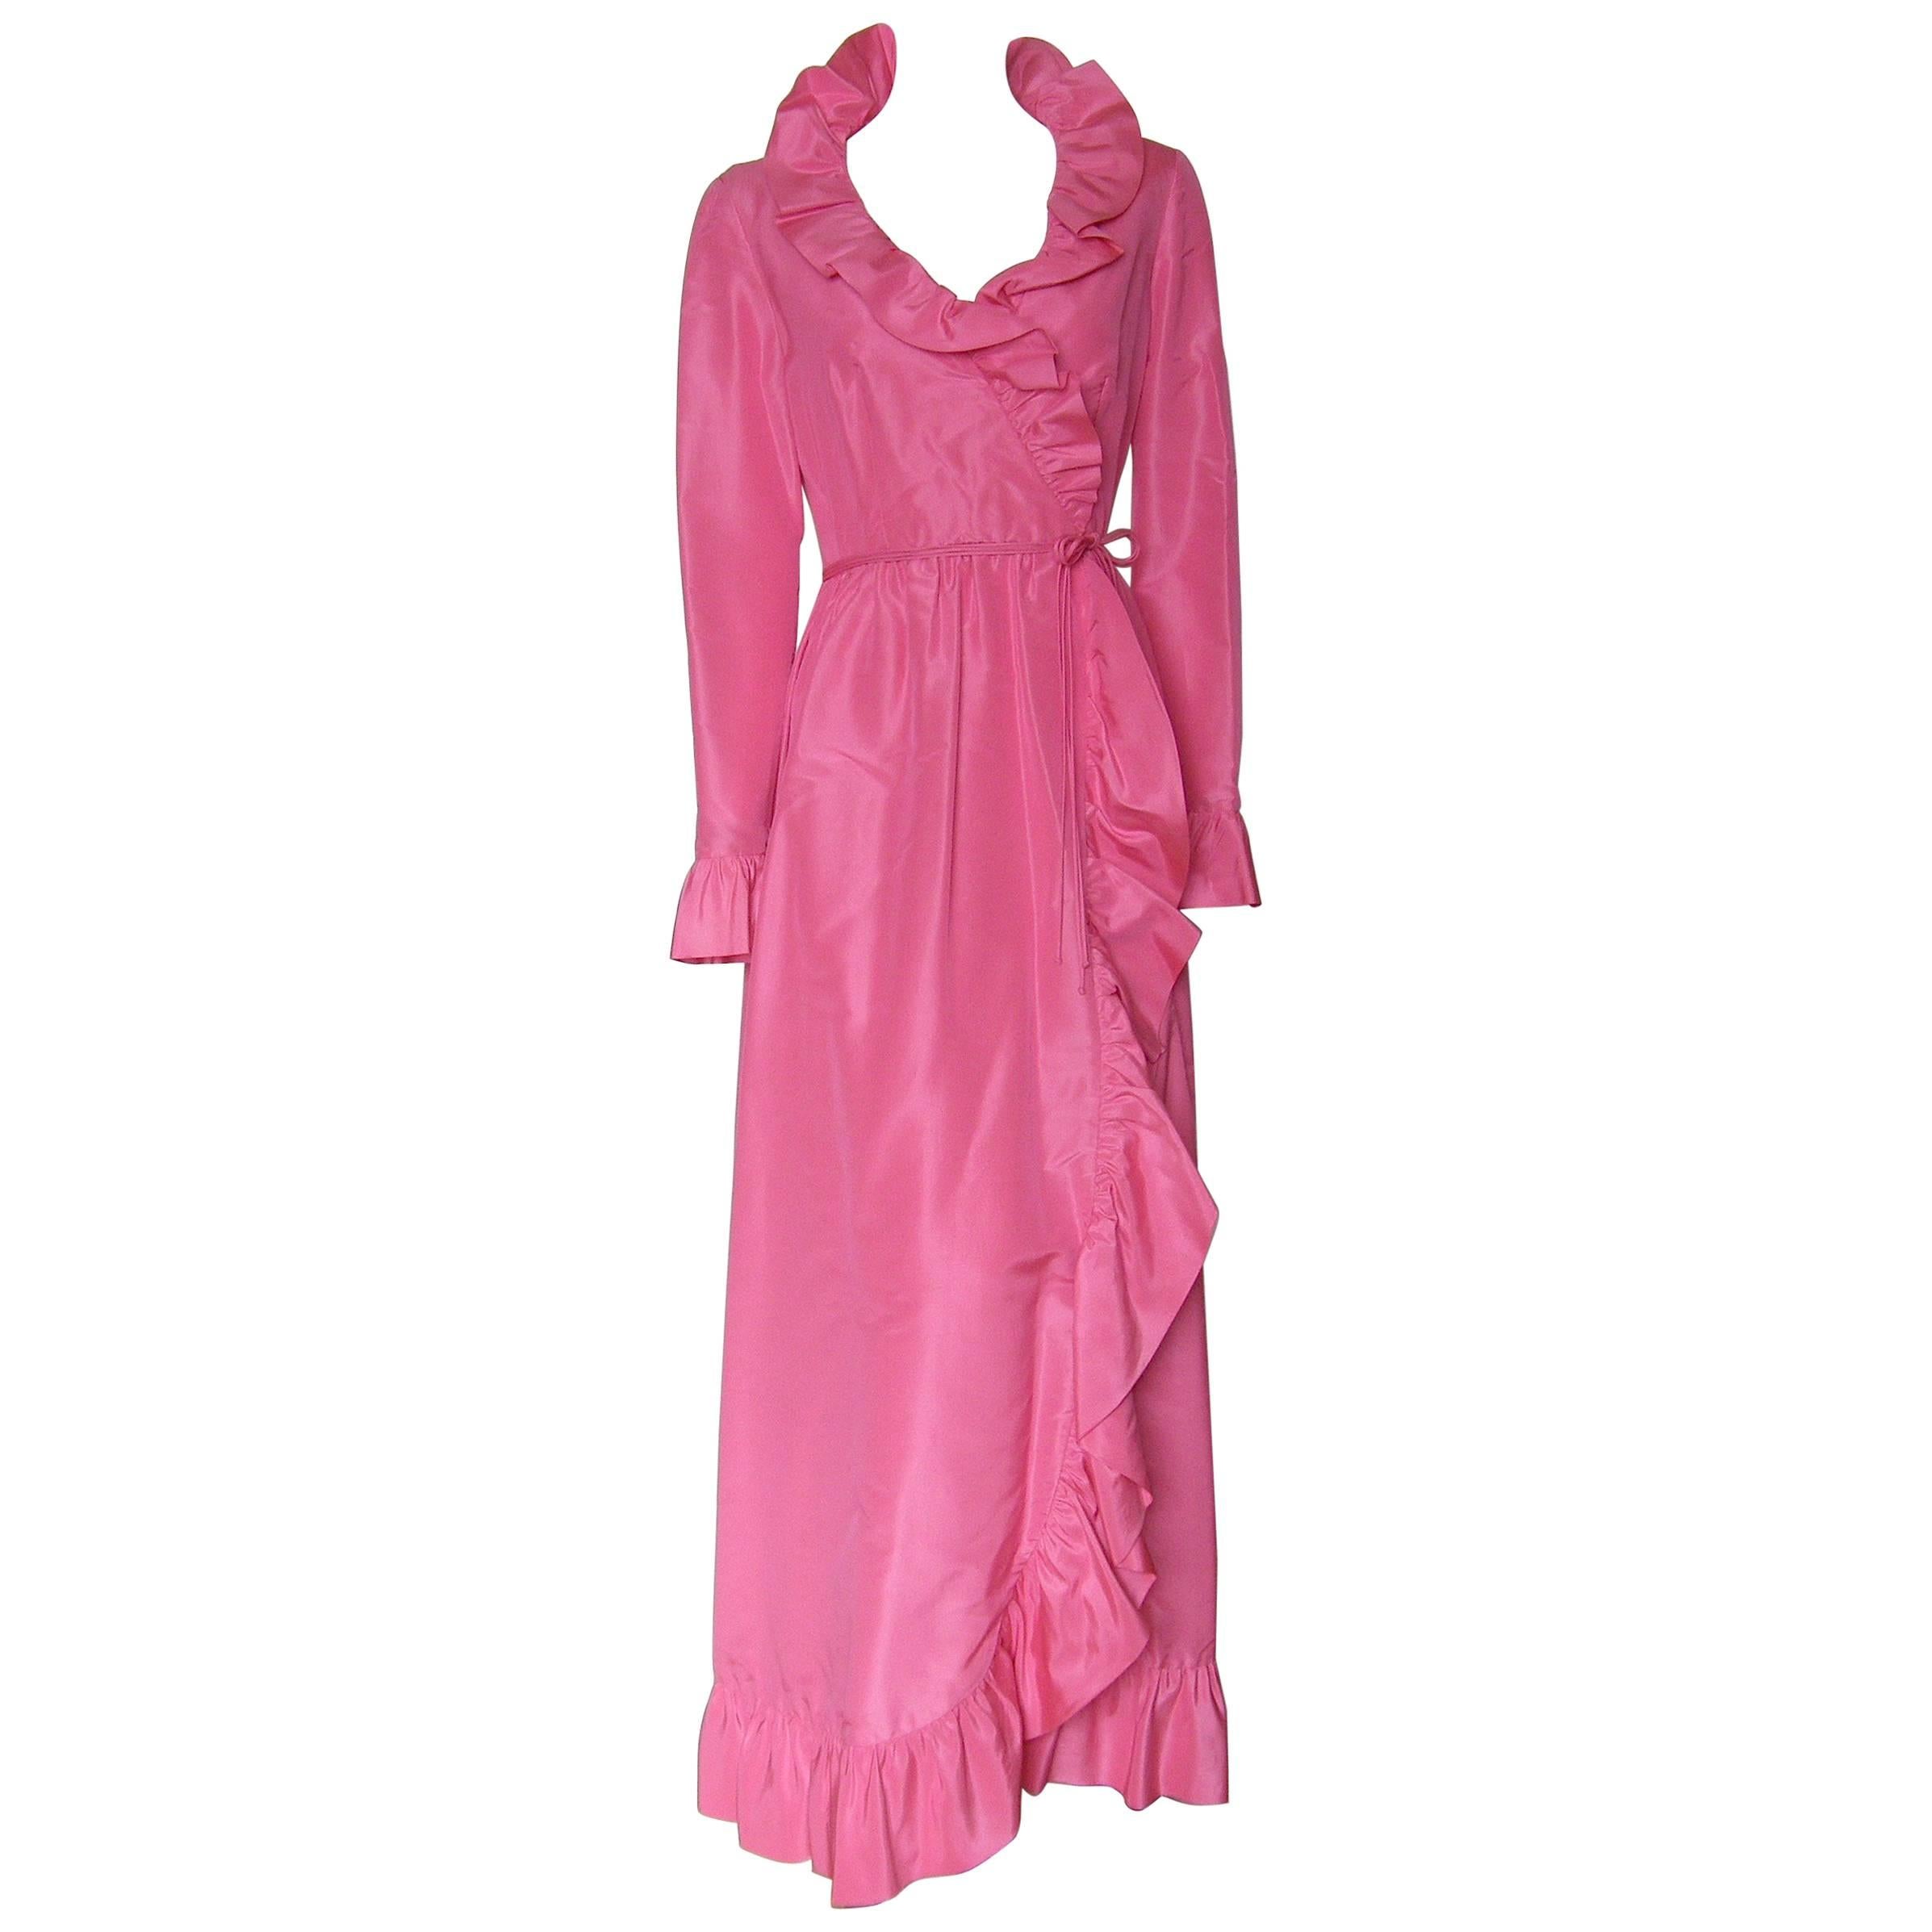 Mollie Parnis Pink Silk Gown Wrap Style with Ruffled Edges and Skirt Slit For Sale